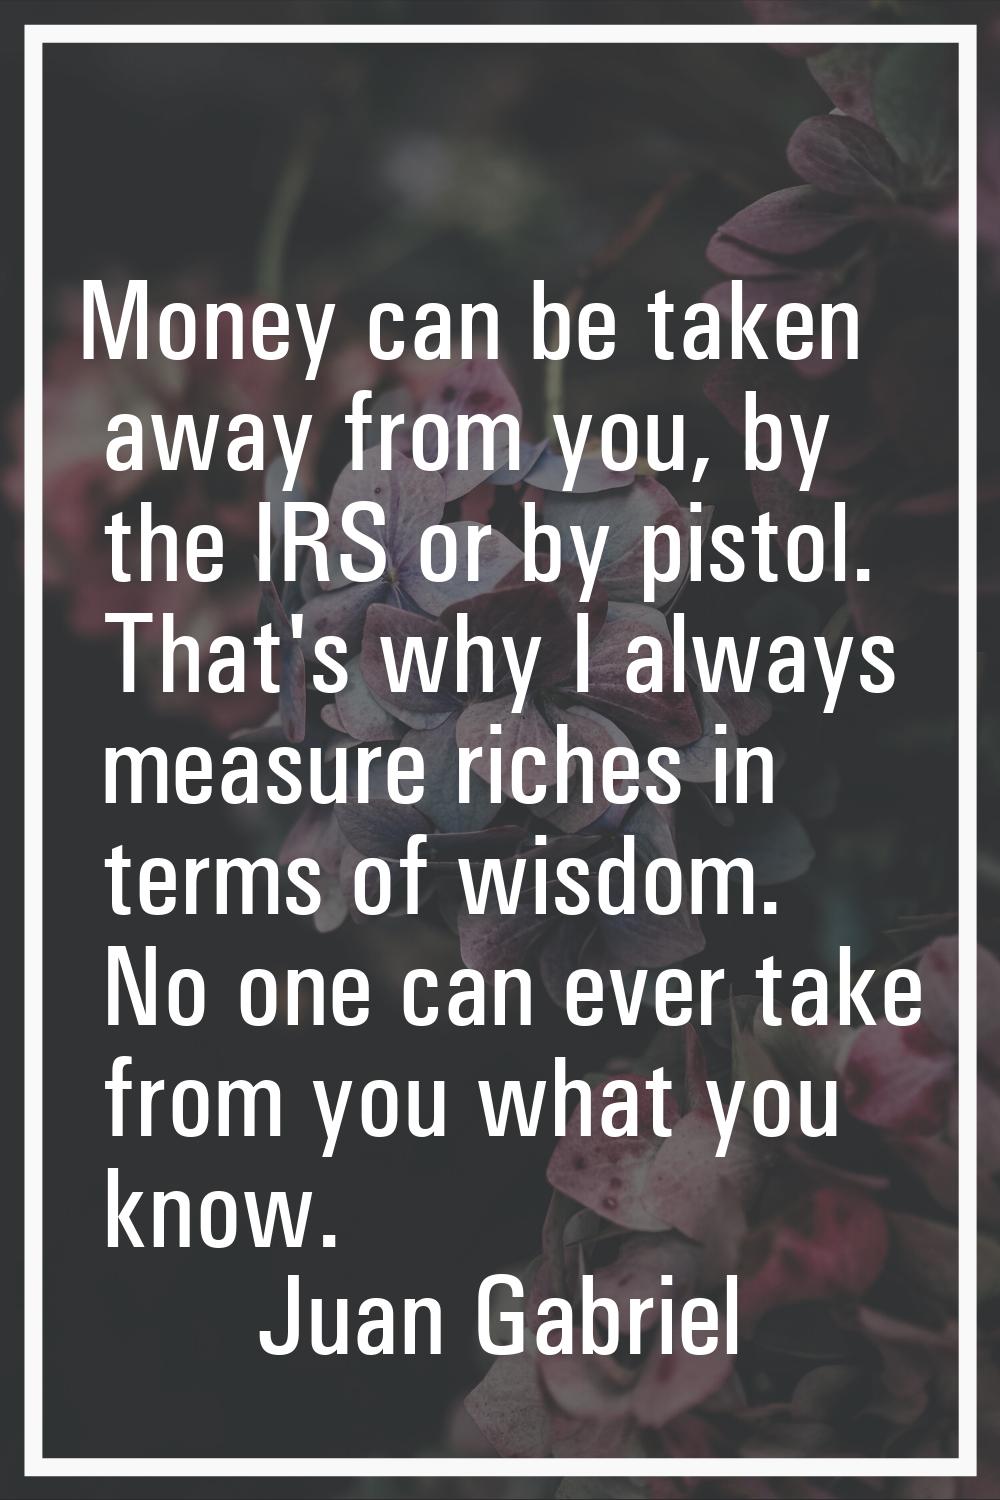 Money can be taken away from you, by the IRS or by pistol. That's why I always measure riches in te